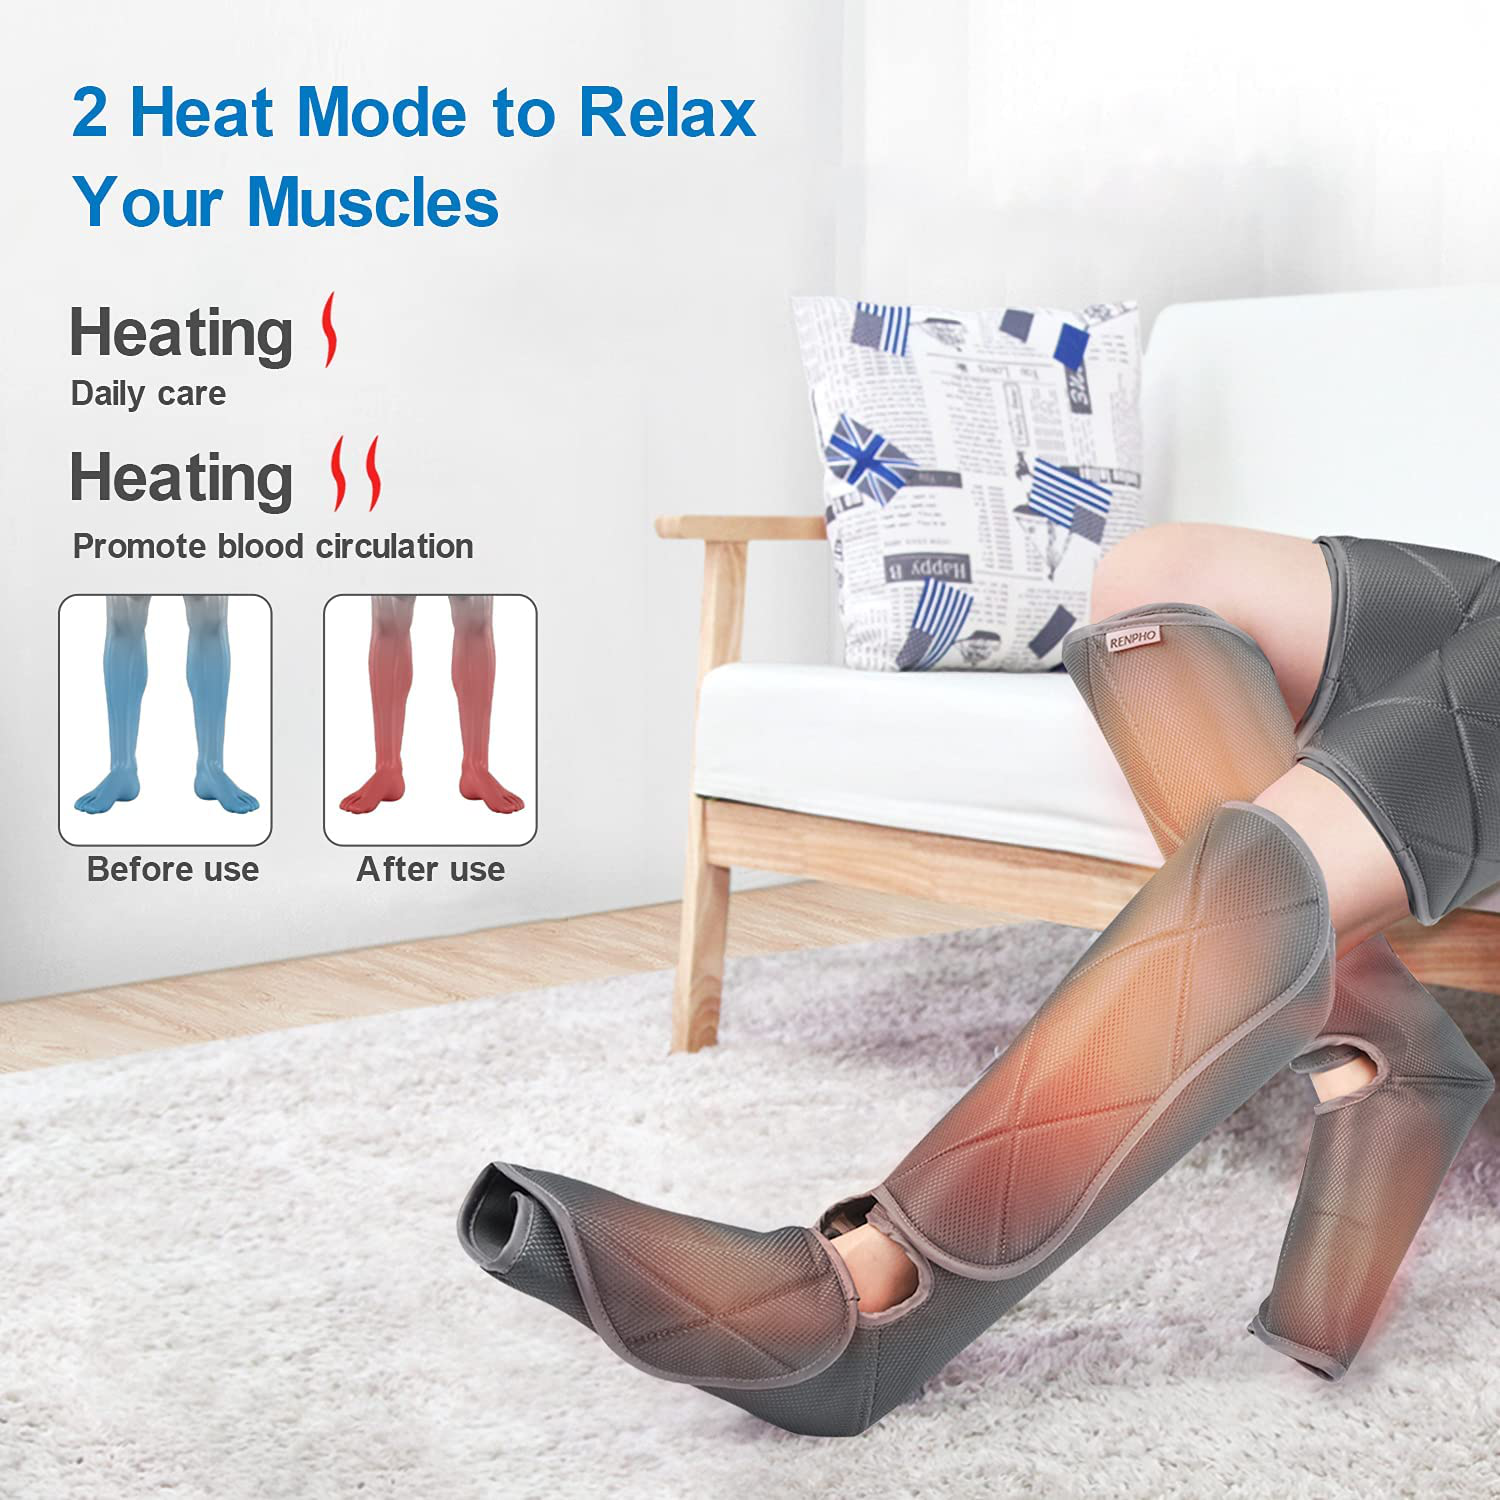 RENPHO Leg Massager with Heat for Circulation, Air Compression Calf Thigh Foot Massage, Adjustable Wraps Design, with 6 Modes 3 Intensities 2 Heat, Gifts for Muscles Relaxation